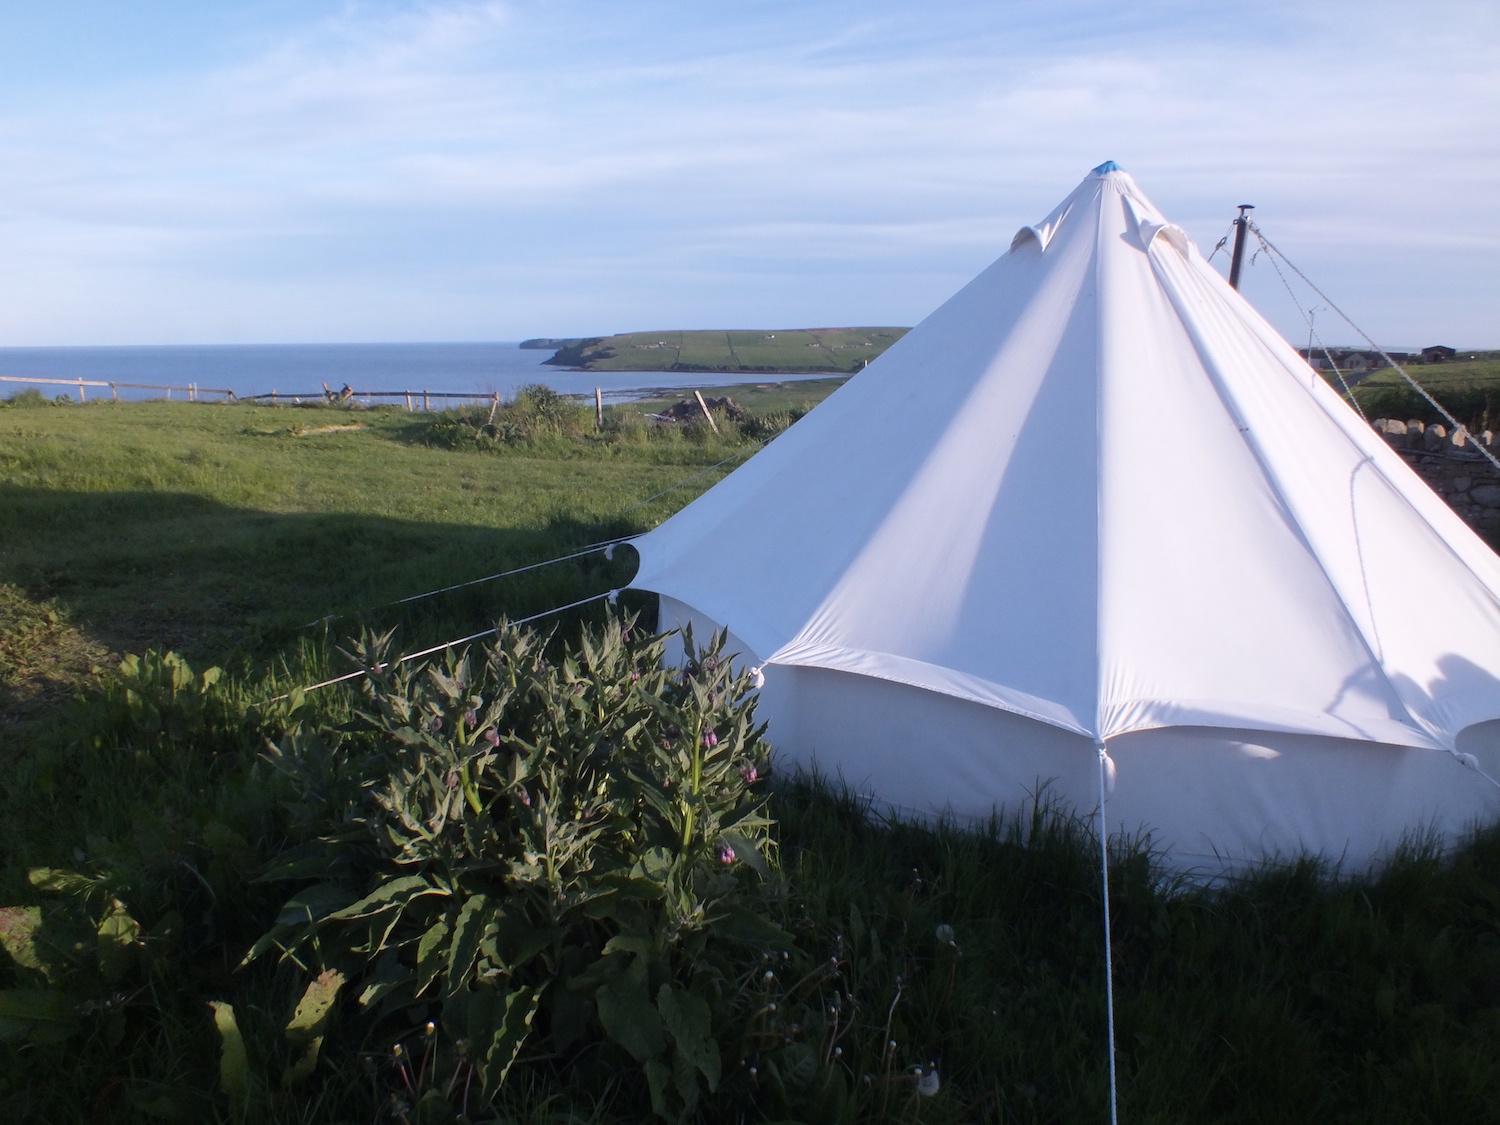 Hotels, Cottages, B&Bs & Glamping in the Scottish Isles